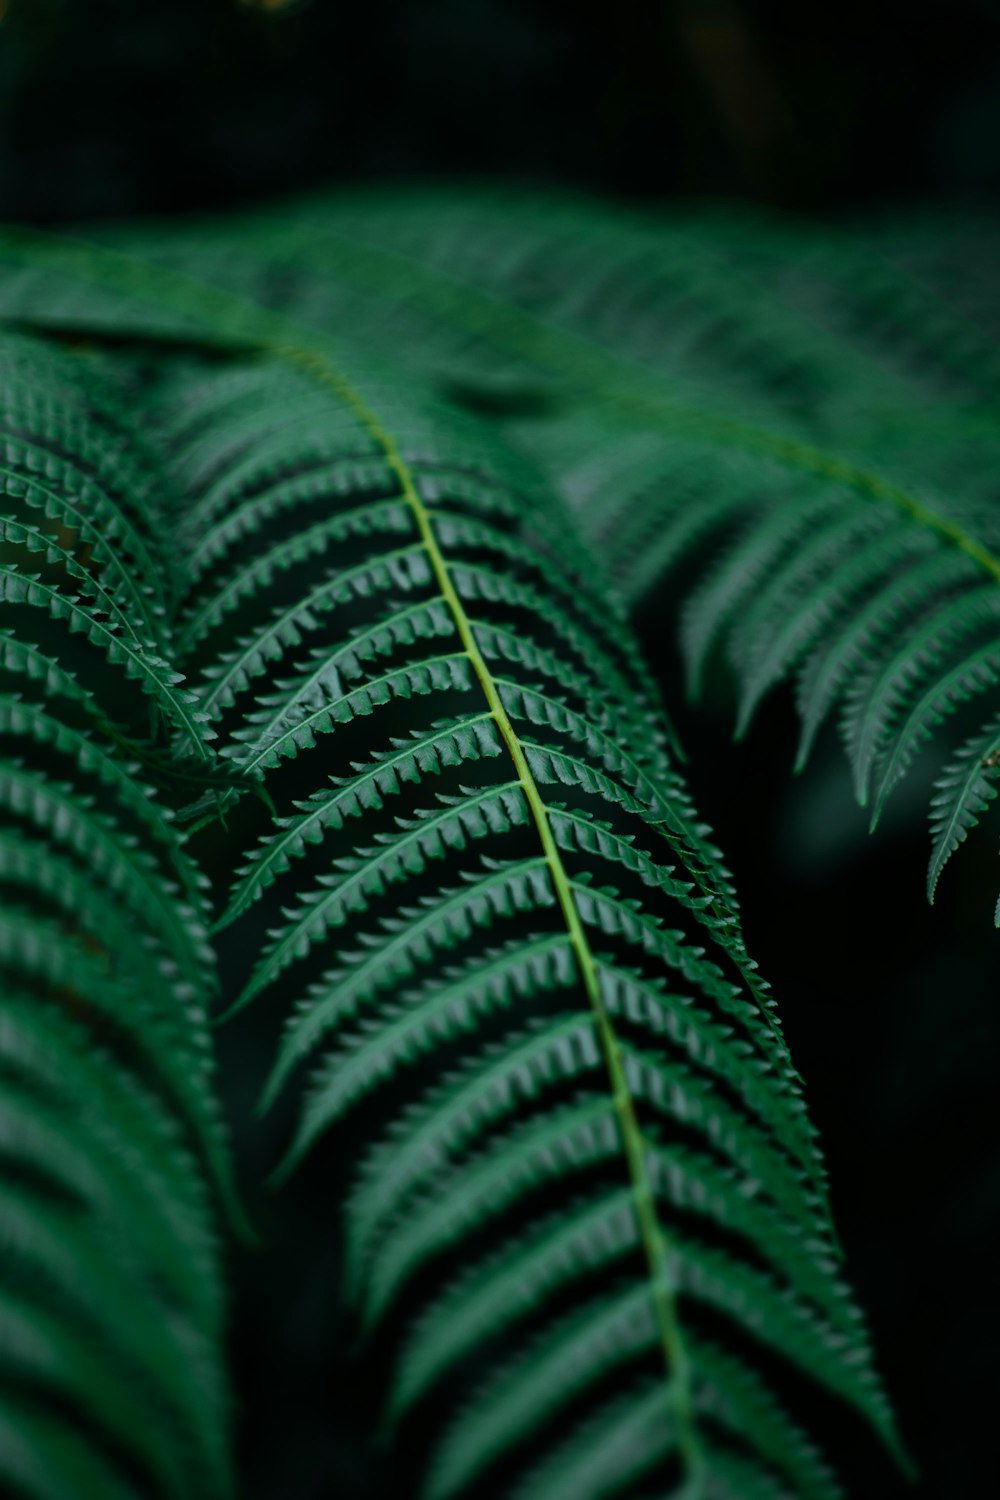 a close up view of a green leaf